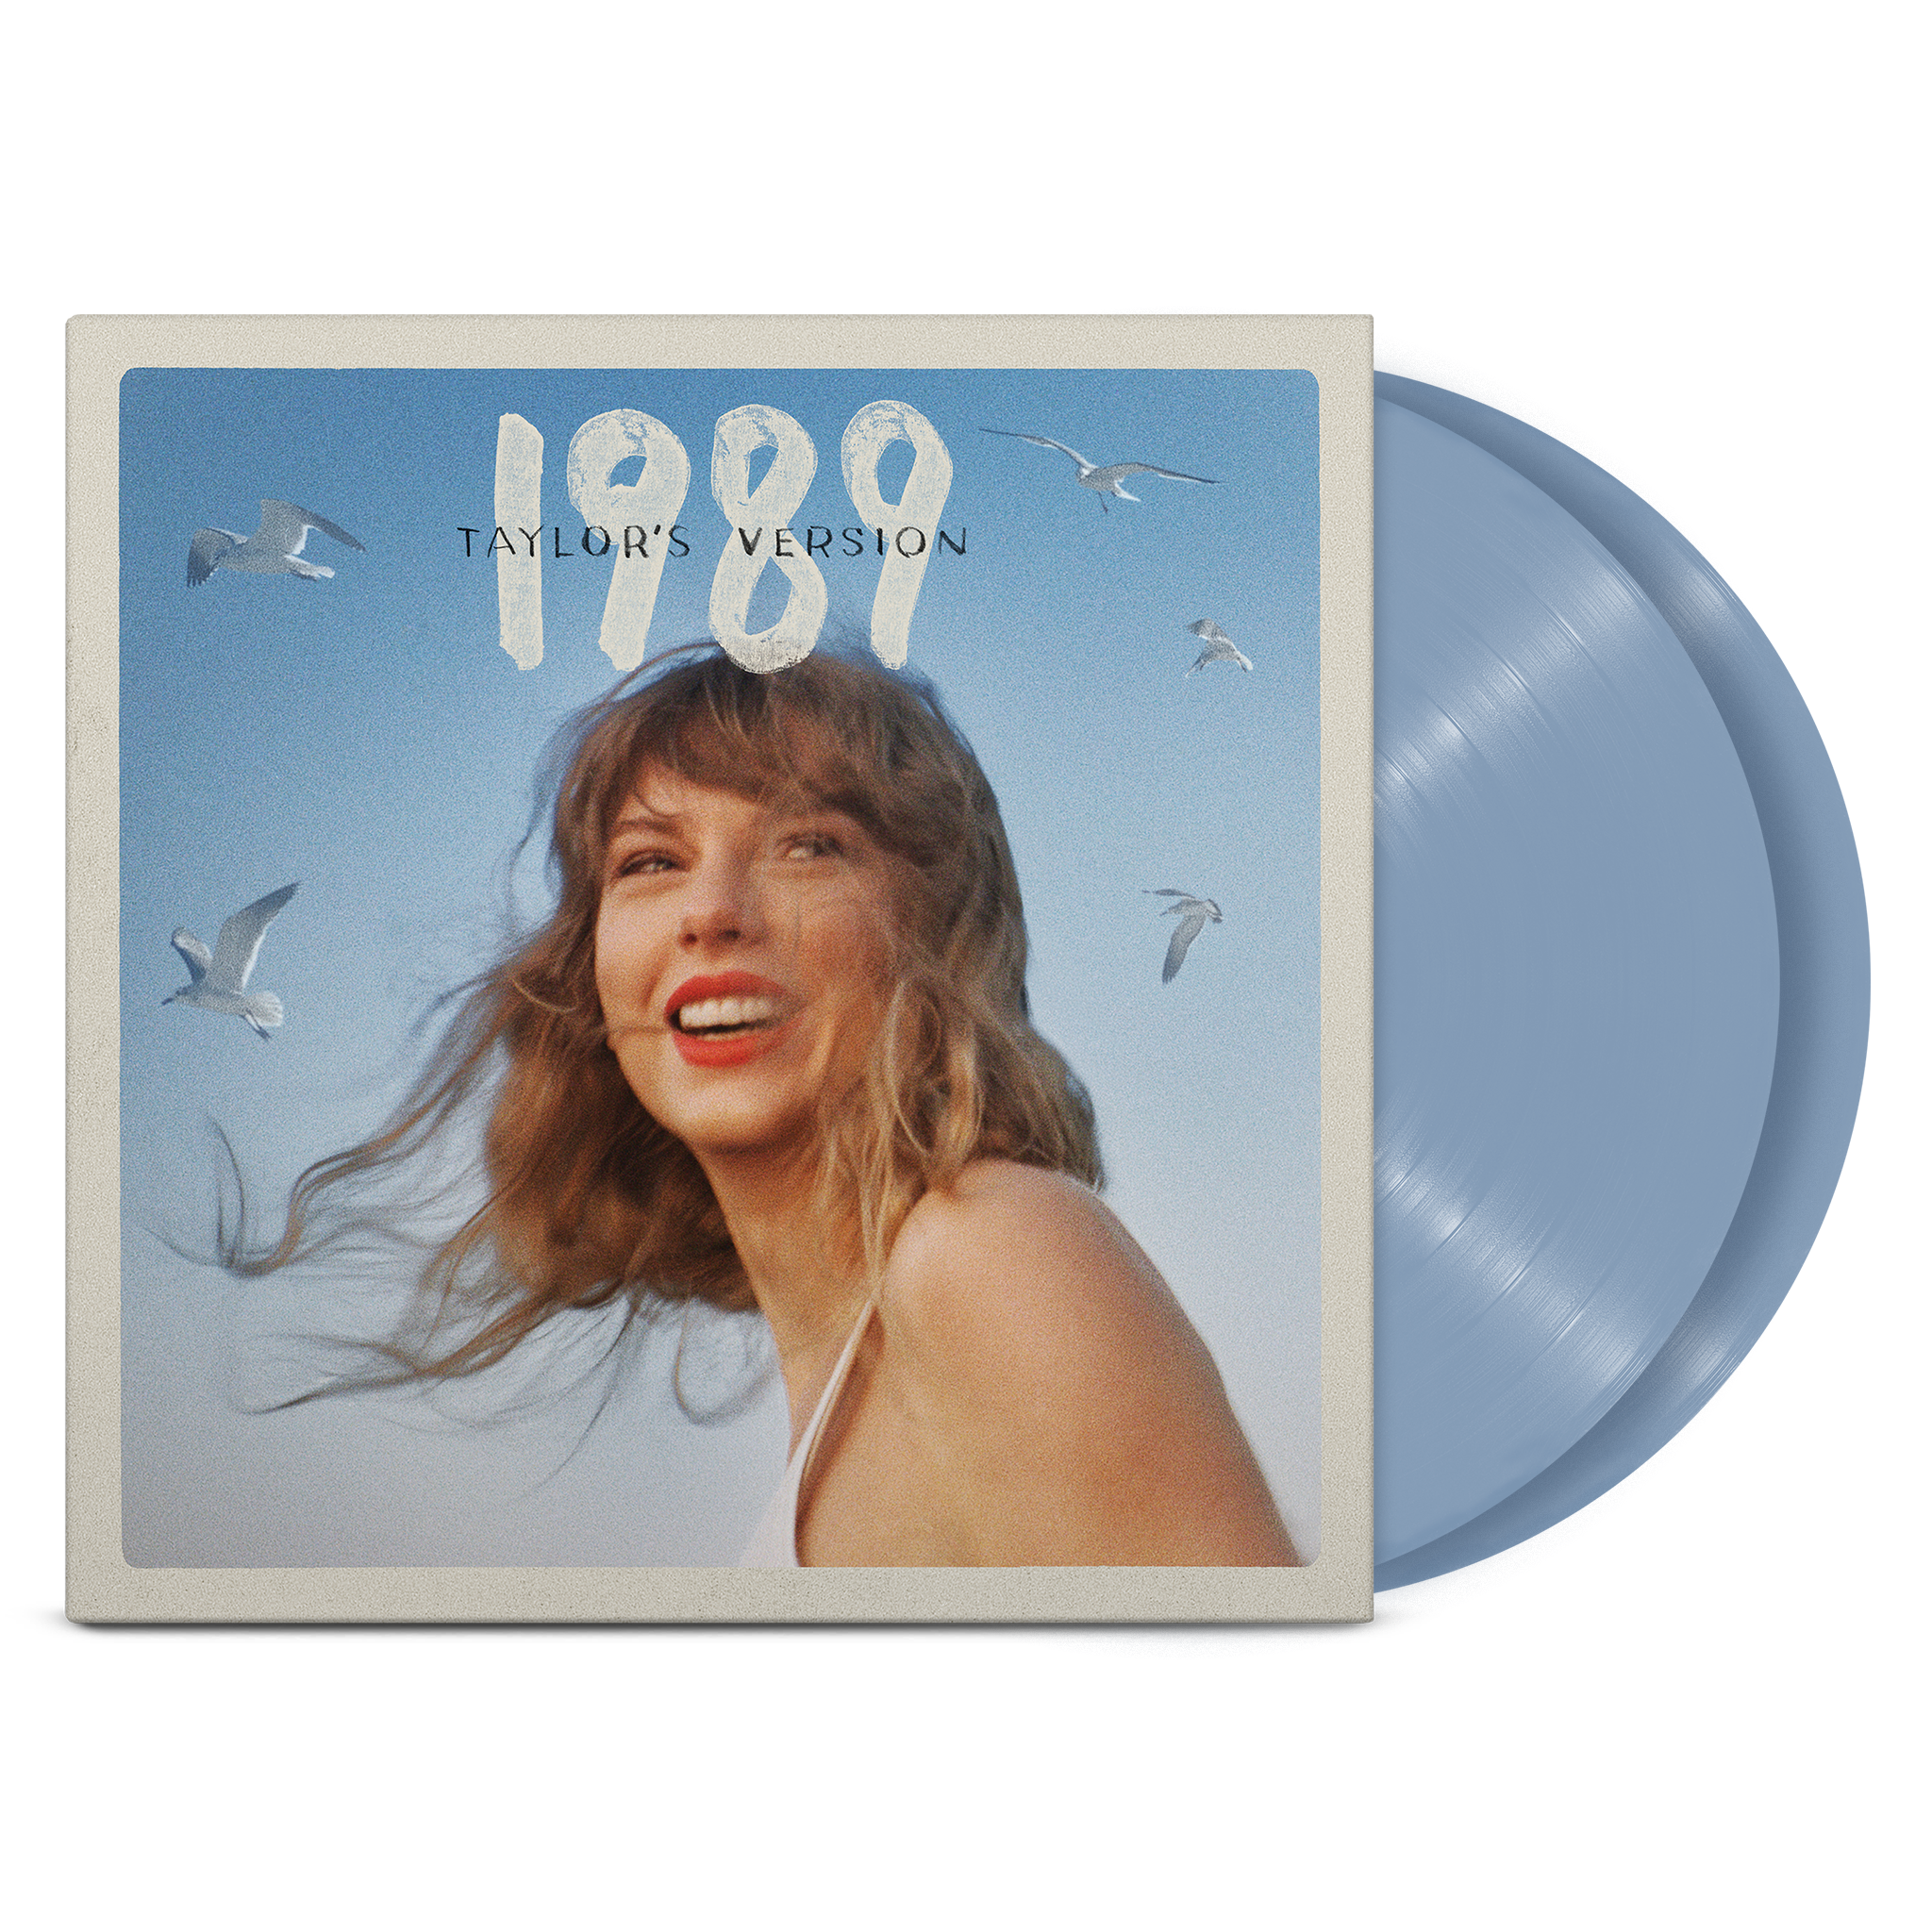 1989 (Taylor's Version) Vinyl - Taylor Swift Official Store